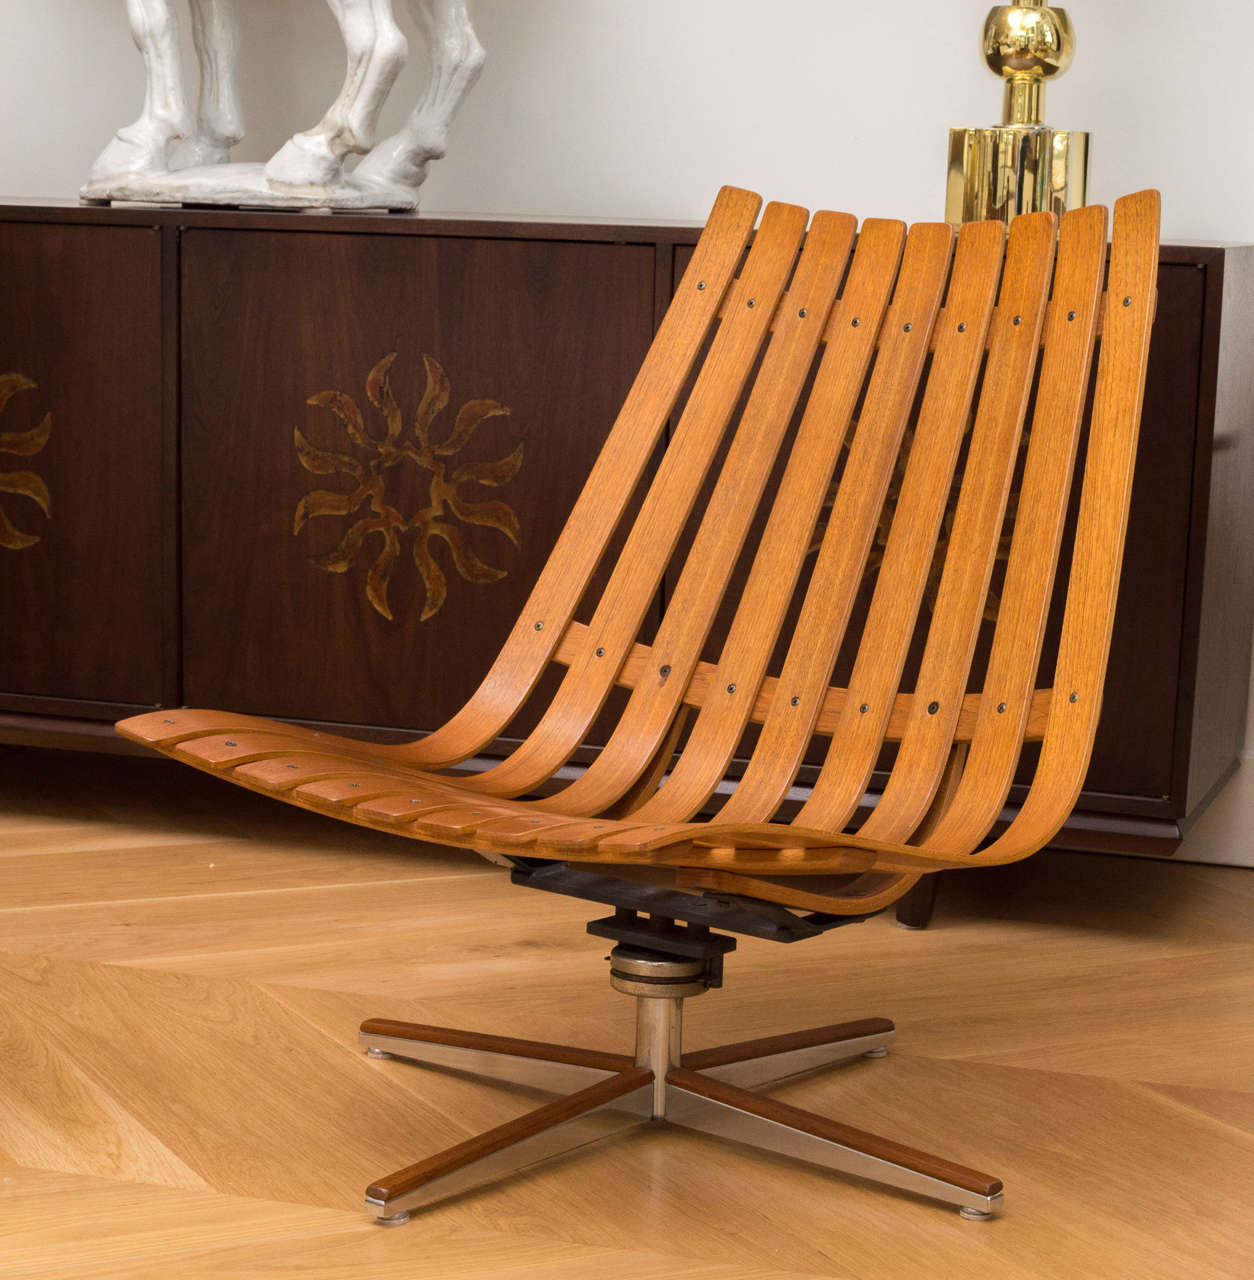 Teak swivel lounge chair by Norwegian designer Hans Brattrud. Produced circa 1960s by Hove Möbler. I still have the leather cushions.